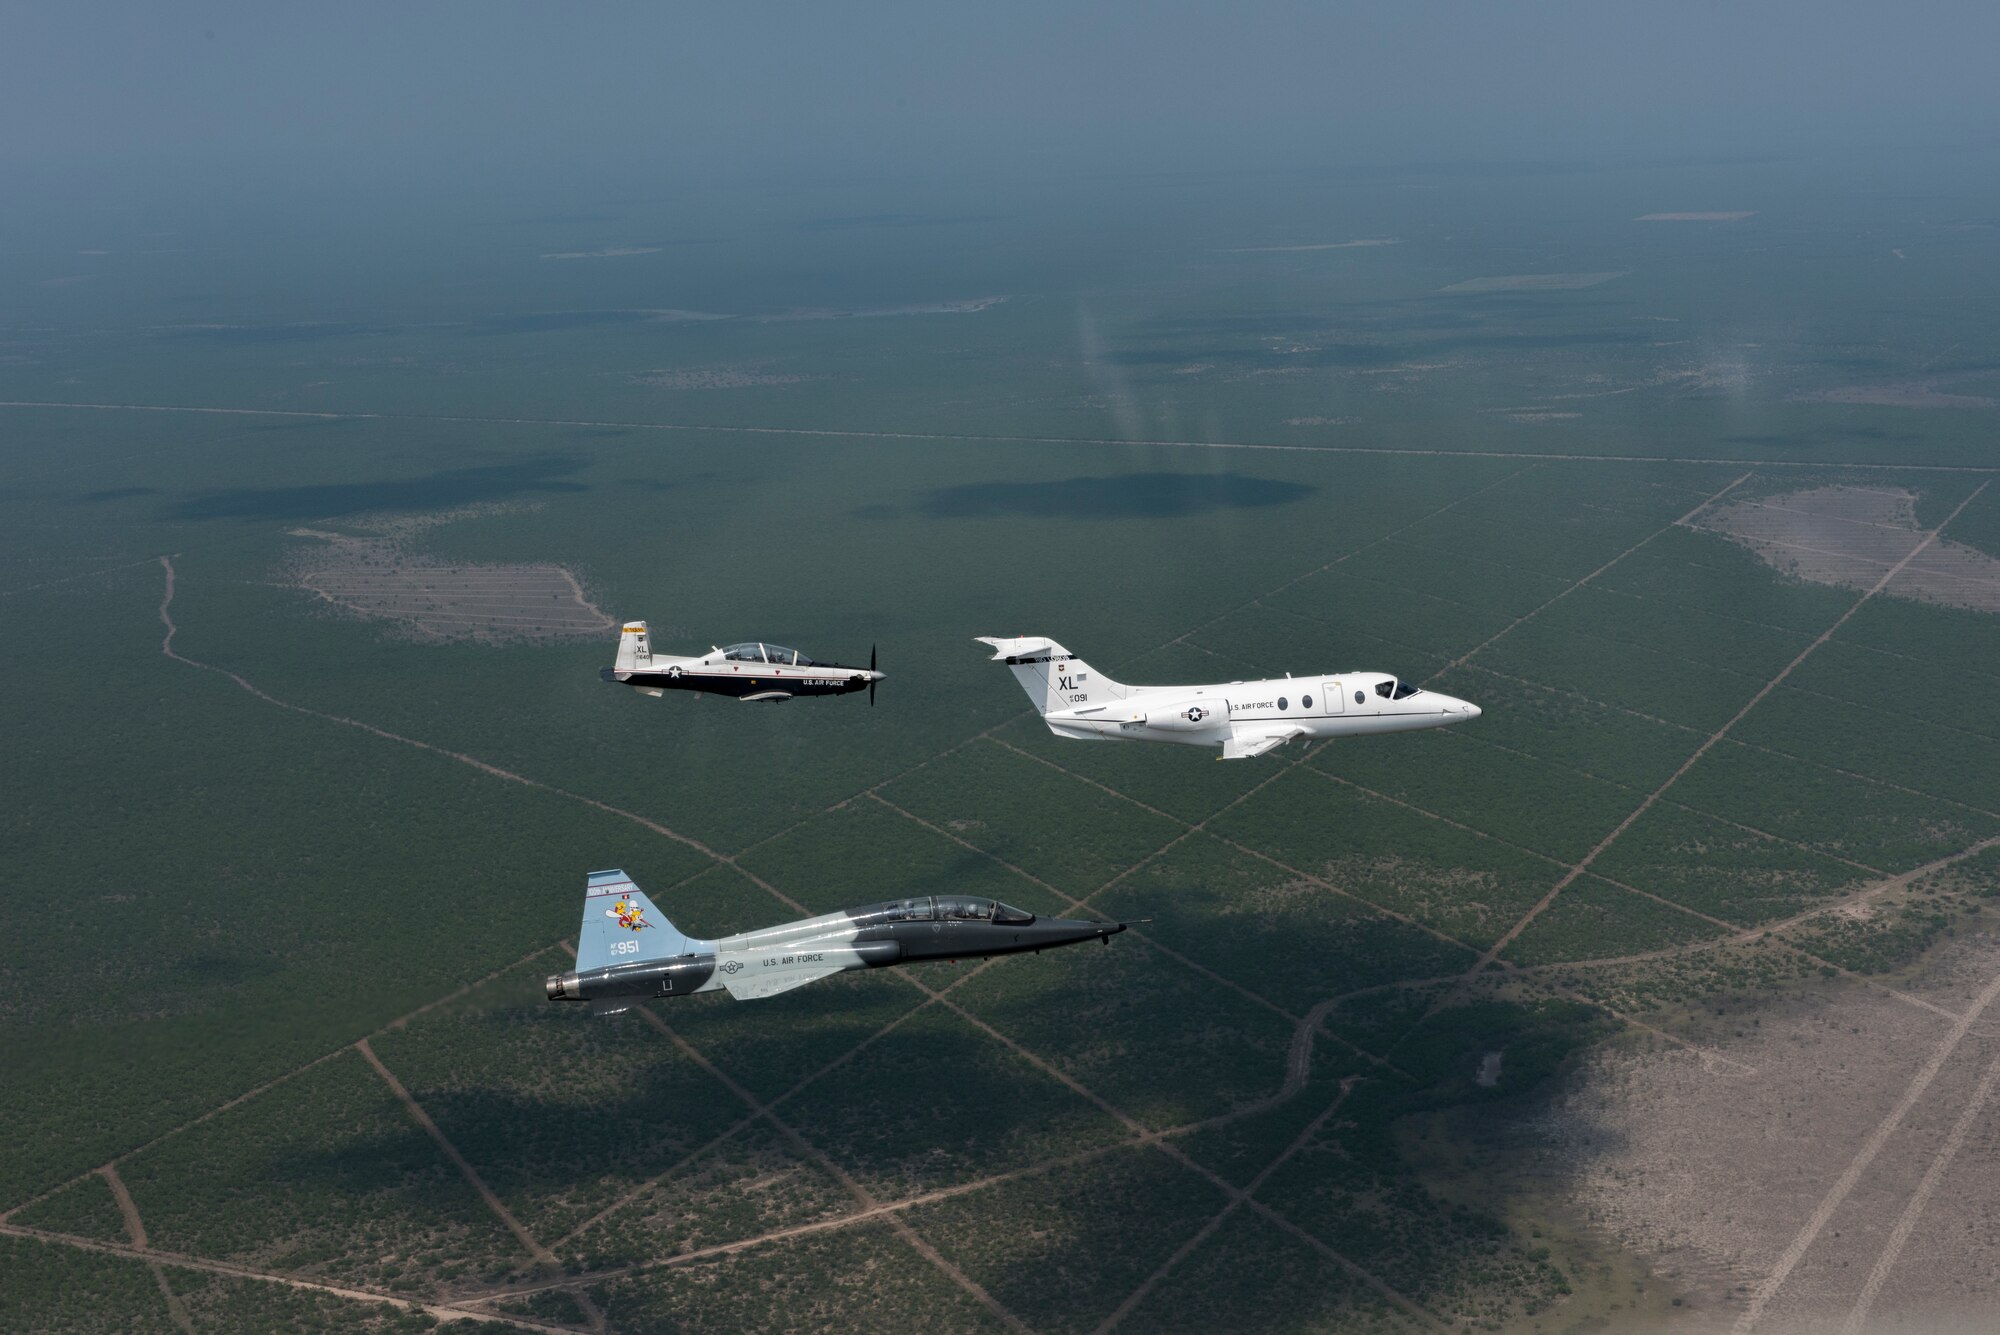 T-6 Texan II, T-1A Jayhawk and a T-38C Talon, assigned to Laughlin Air Force Base, Texas, perform a flyover in Eagle Pass, Texas, May 21, 2020. Laughlin performed flyovers in three Texas cities as a part of the America Strong America Salutes Campaign, to show its gratitude for all front-line responders, economy sustainers and community members in the COVID-19 pandemic. (U.S. Air Force photo by Master Sgt. JT May III)